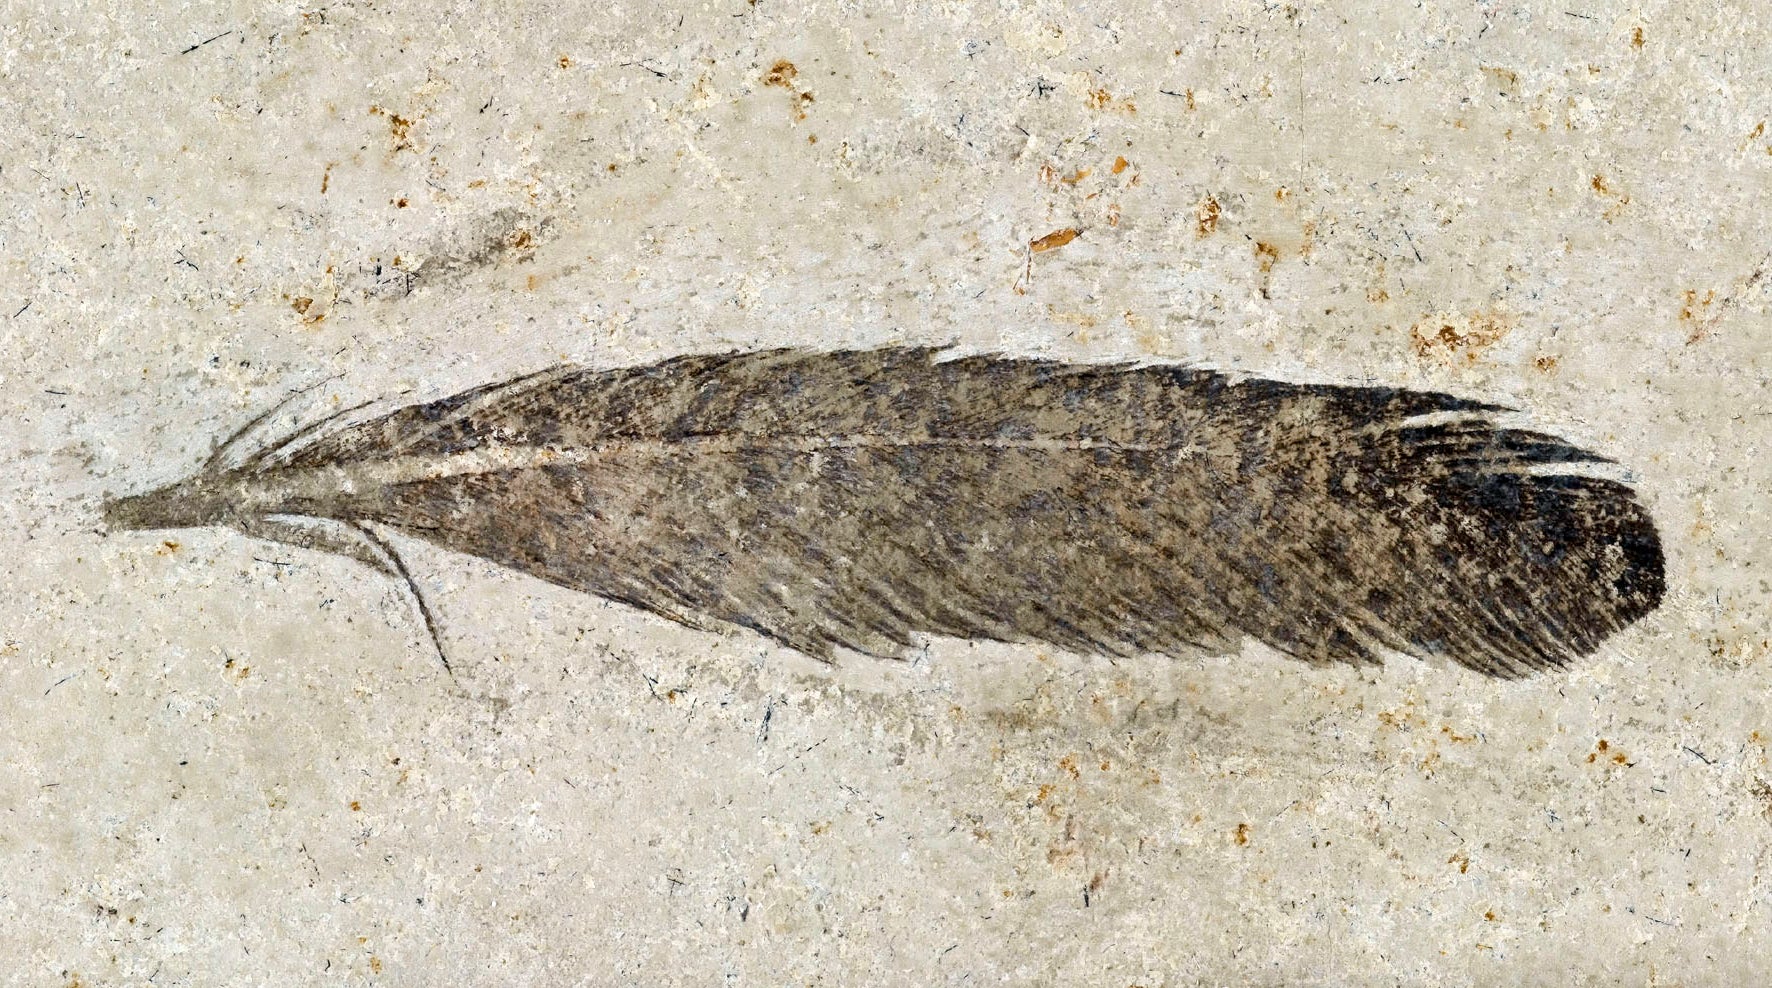 A fossil feather found in 1861 in Bavaria, and originally identified as coming from an archaeopteryx. To settle a lengthy debate, a team of paleontologists says the specimen unearthed in the 19th century was shed by an archaeopteryx.